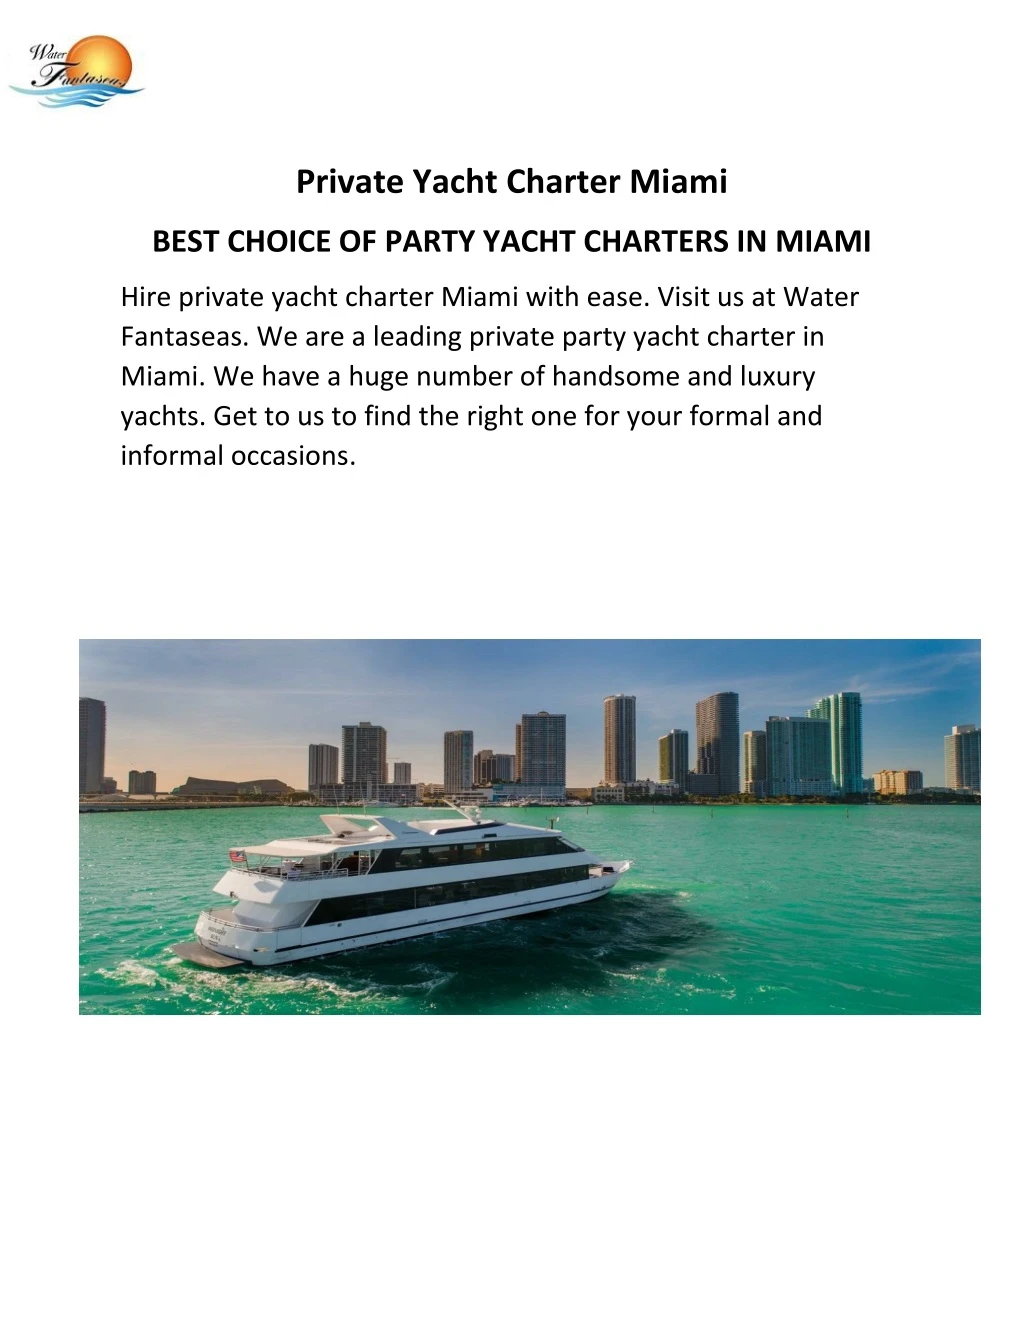 private yacht charter miami n.